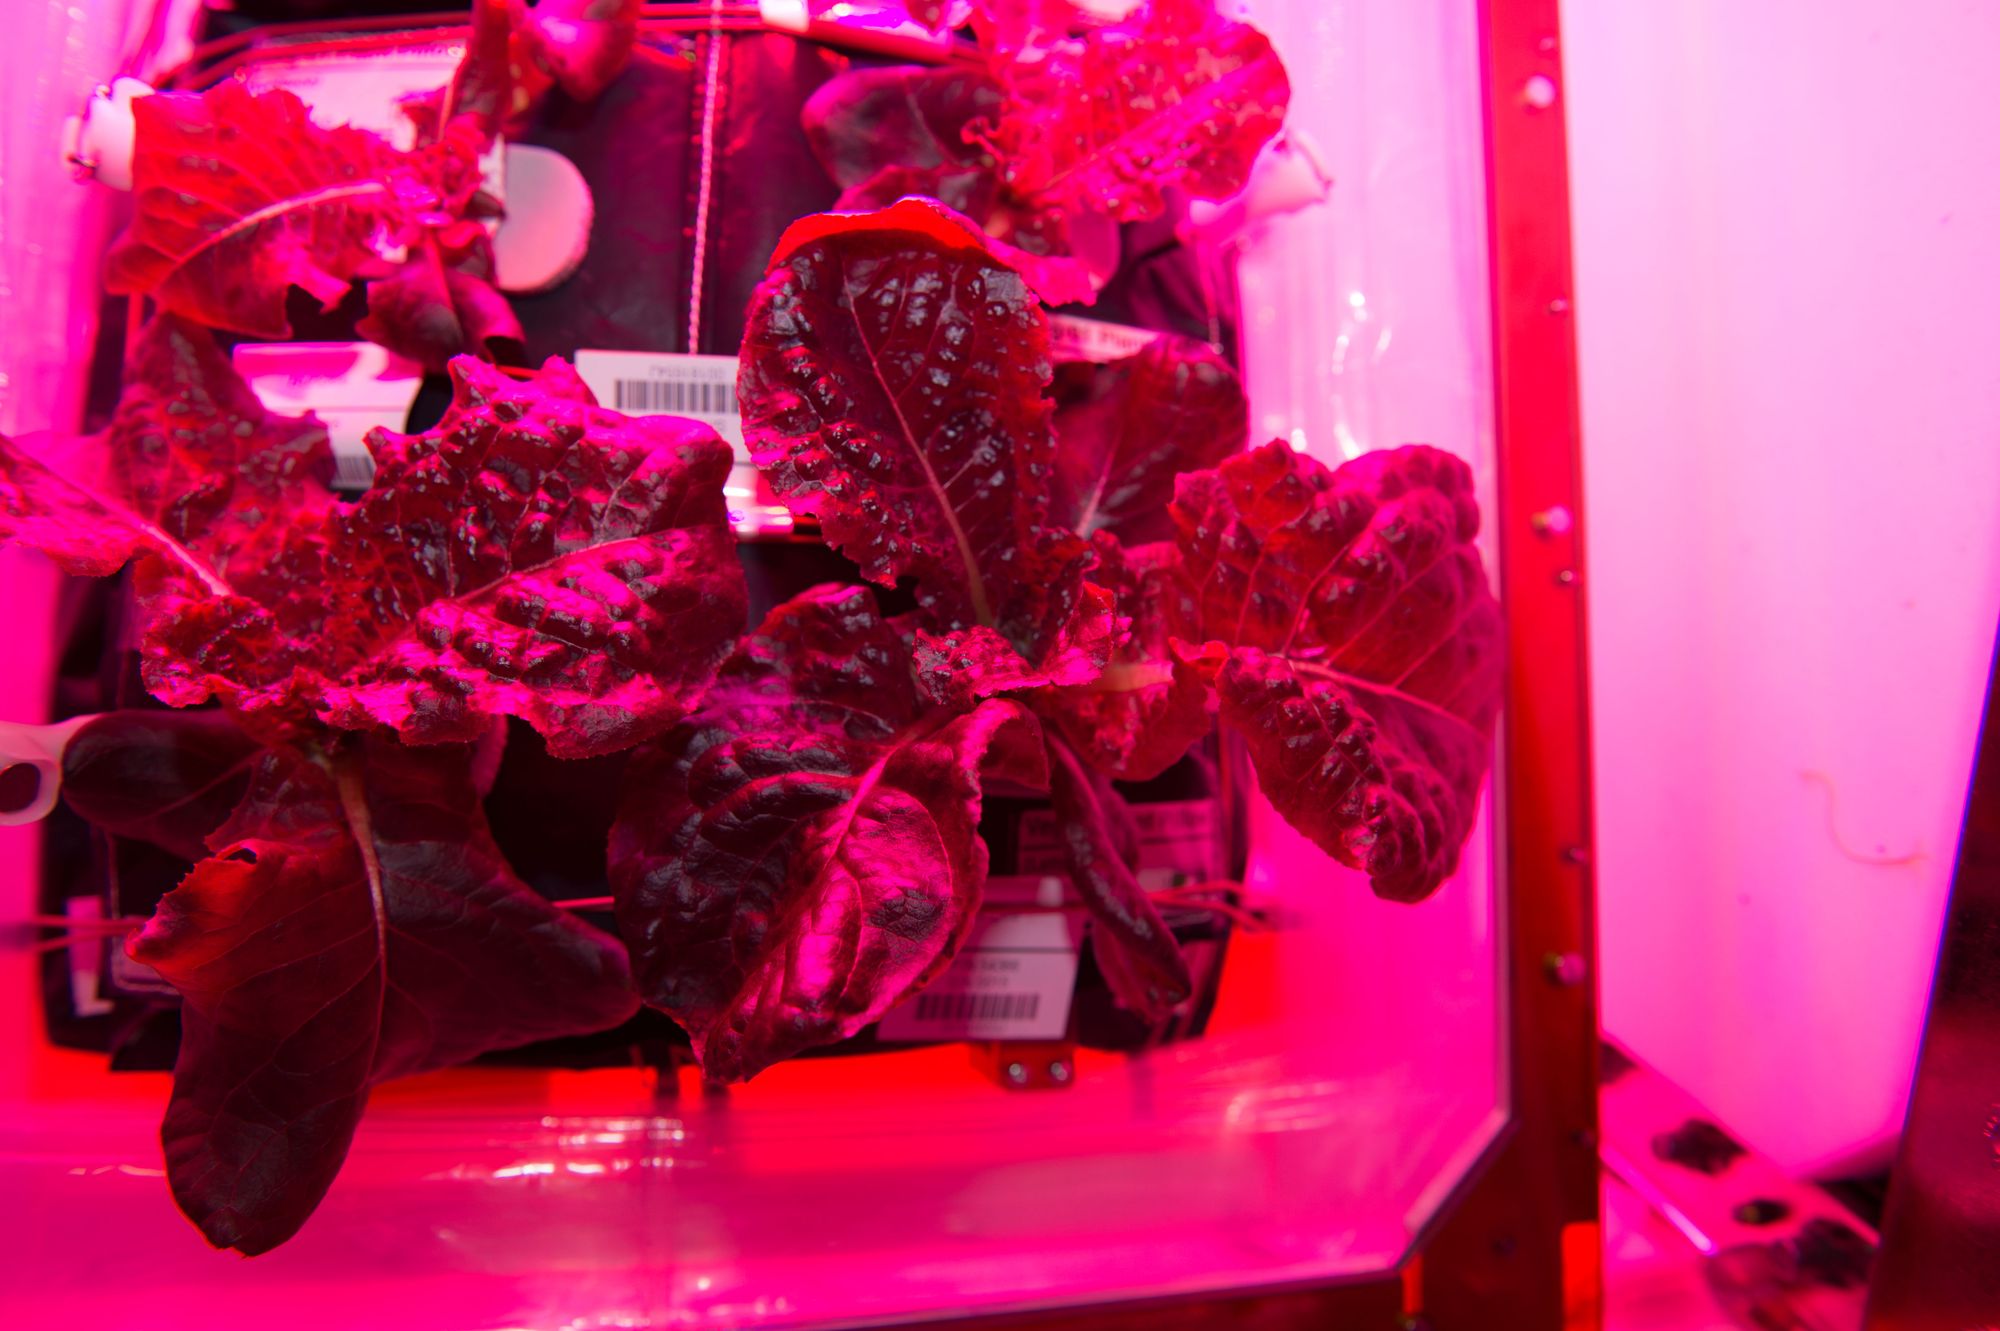 How fungi can help feed future space colonies